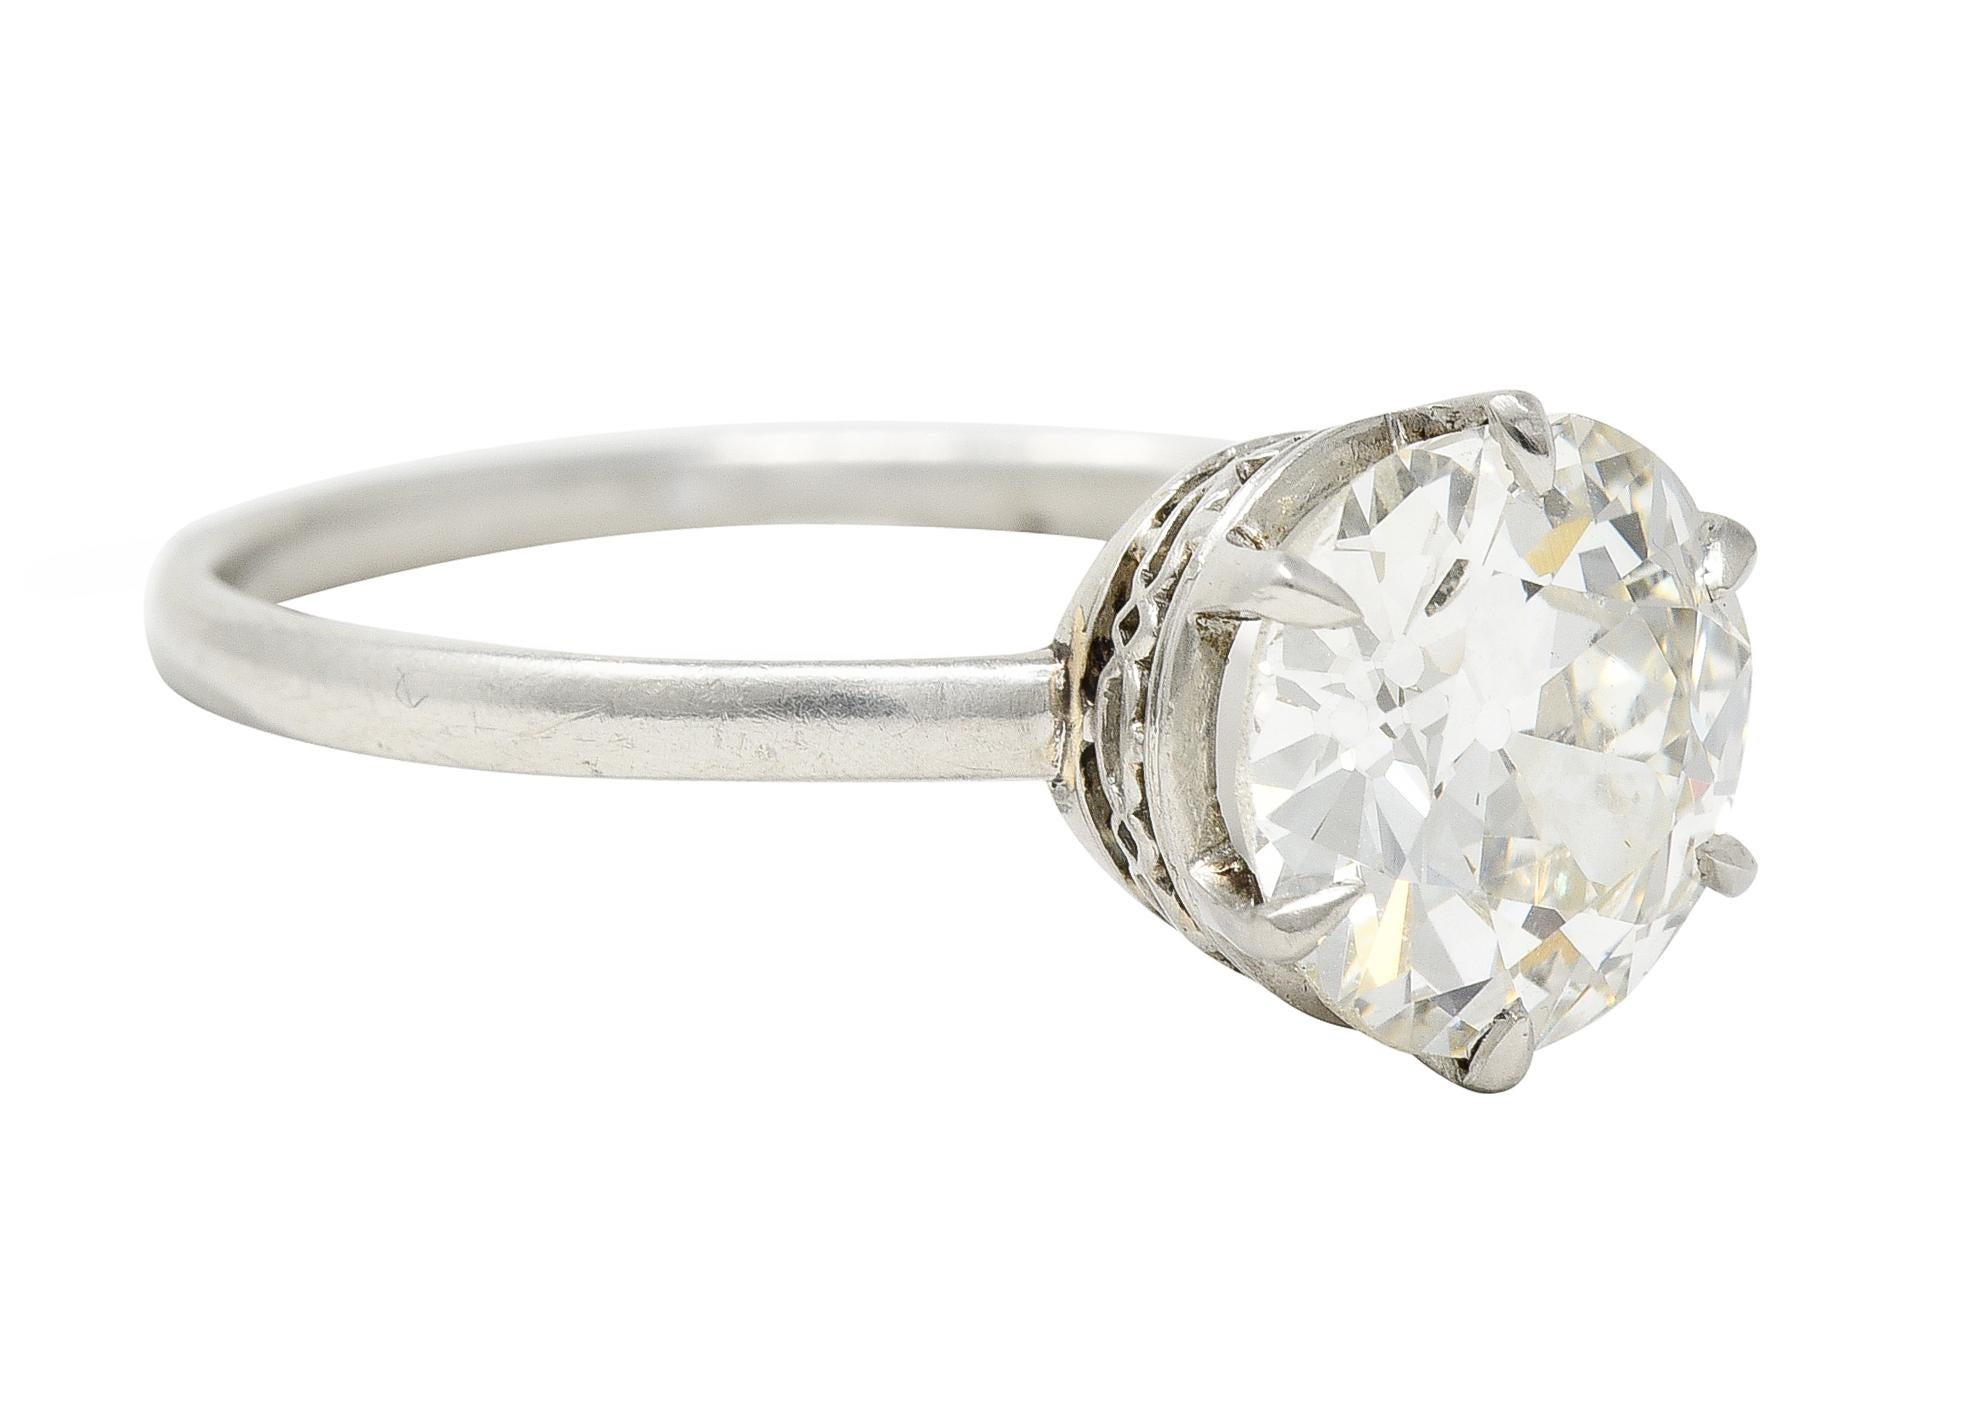 Centering an old European cut diamond weighing 2.29 carats - K color with VS1 clarity. Set in a six prong basket with a pierced gallery. Depicting a geometric pattern fully around. Tested as platinum. Circa: 1930's. Ring size: 6 3/4 and sizable.